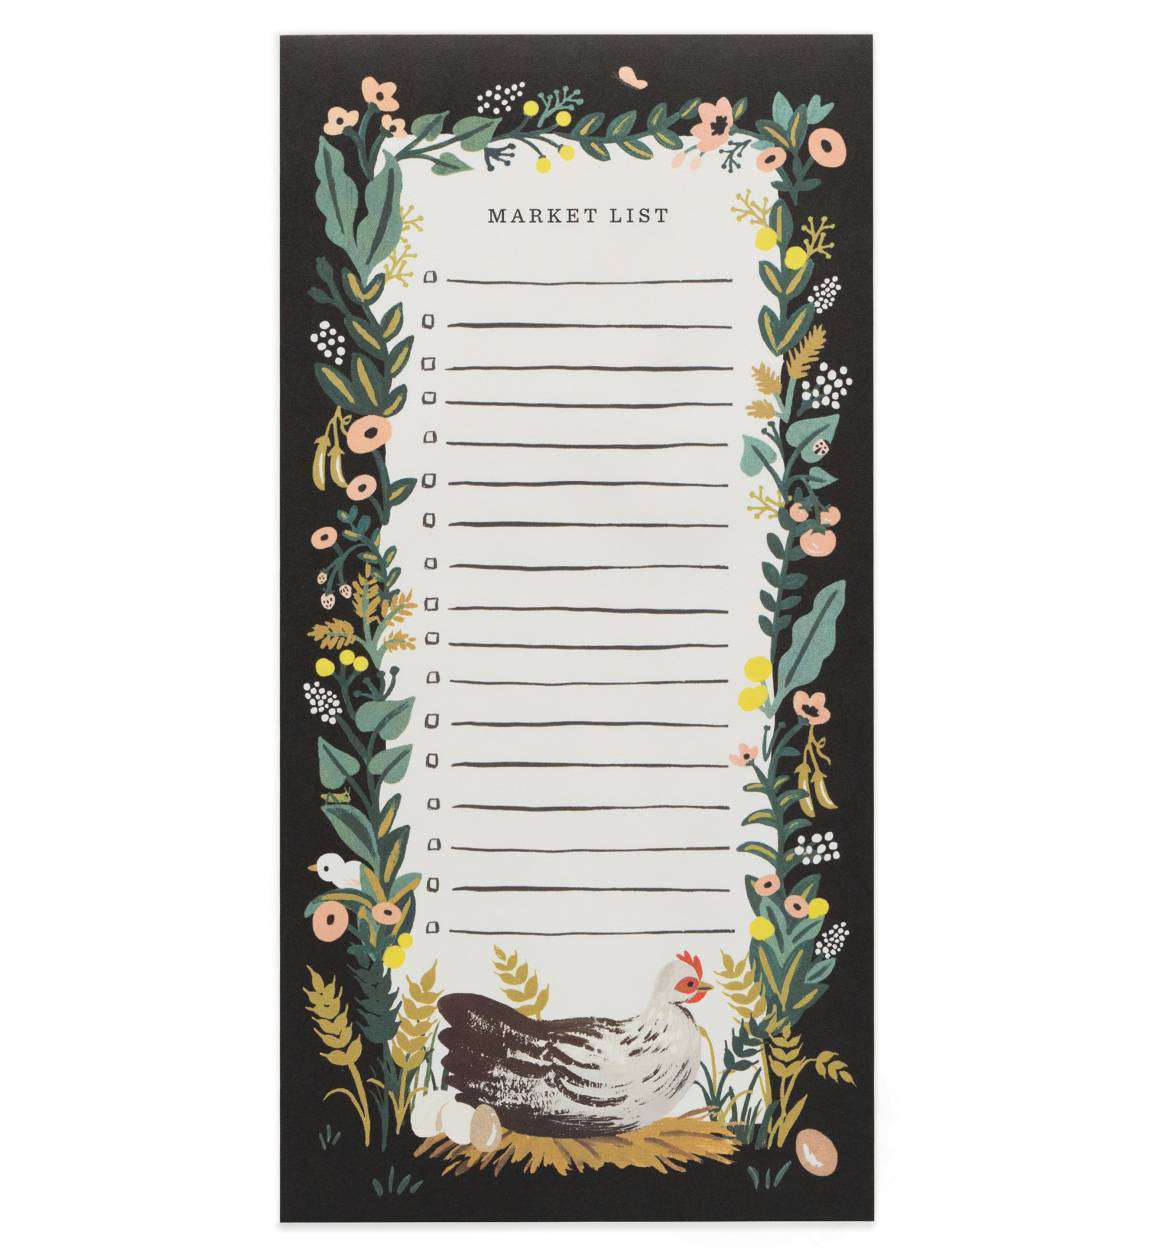 Modest gifts market tear off shopping list black with chickens and floral